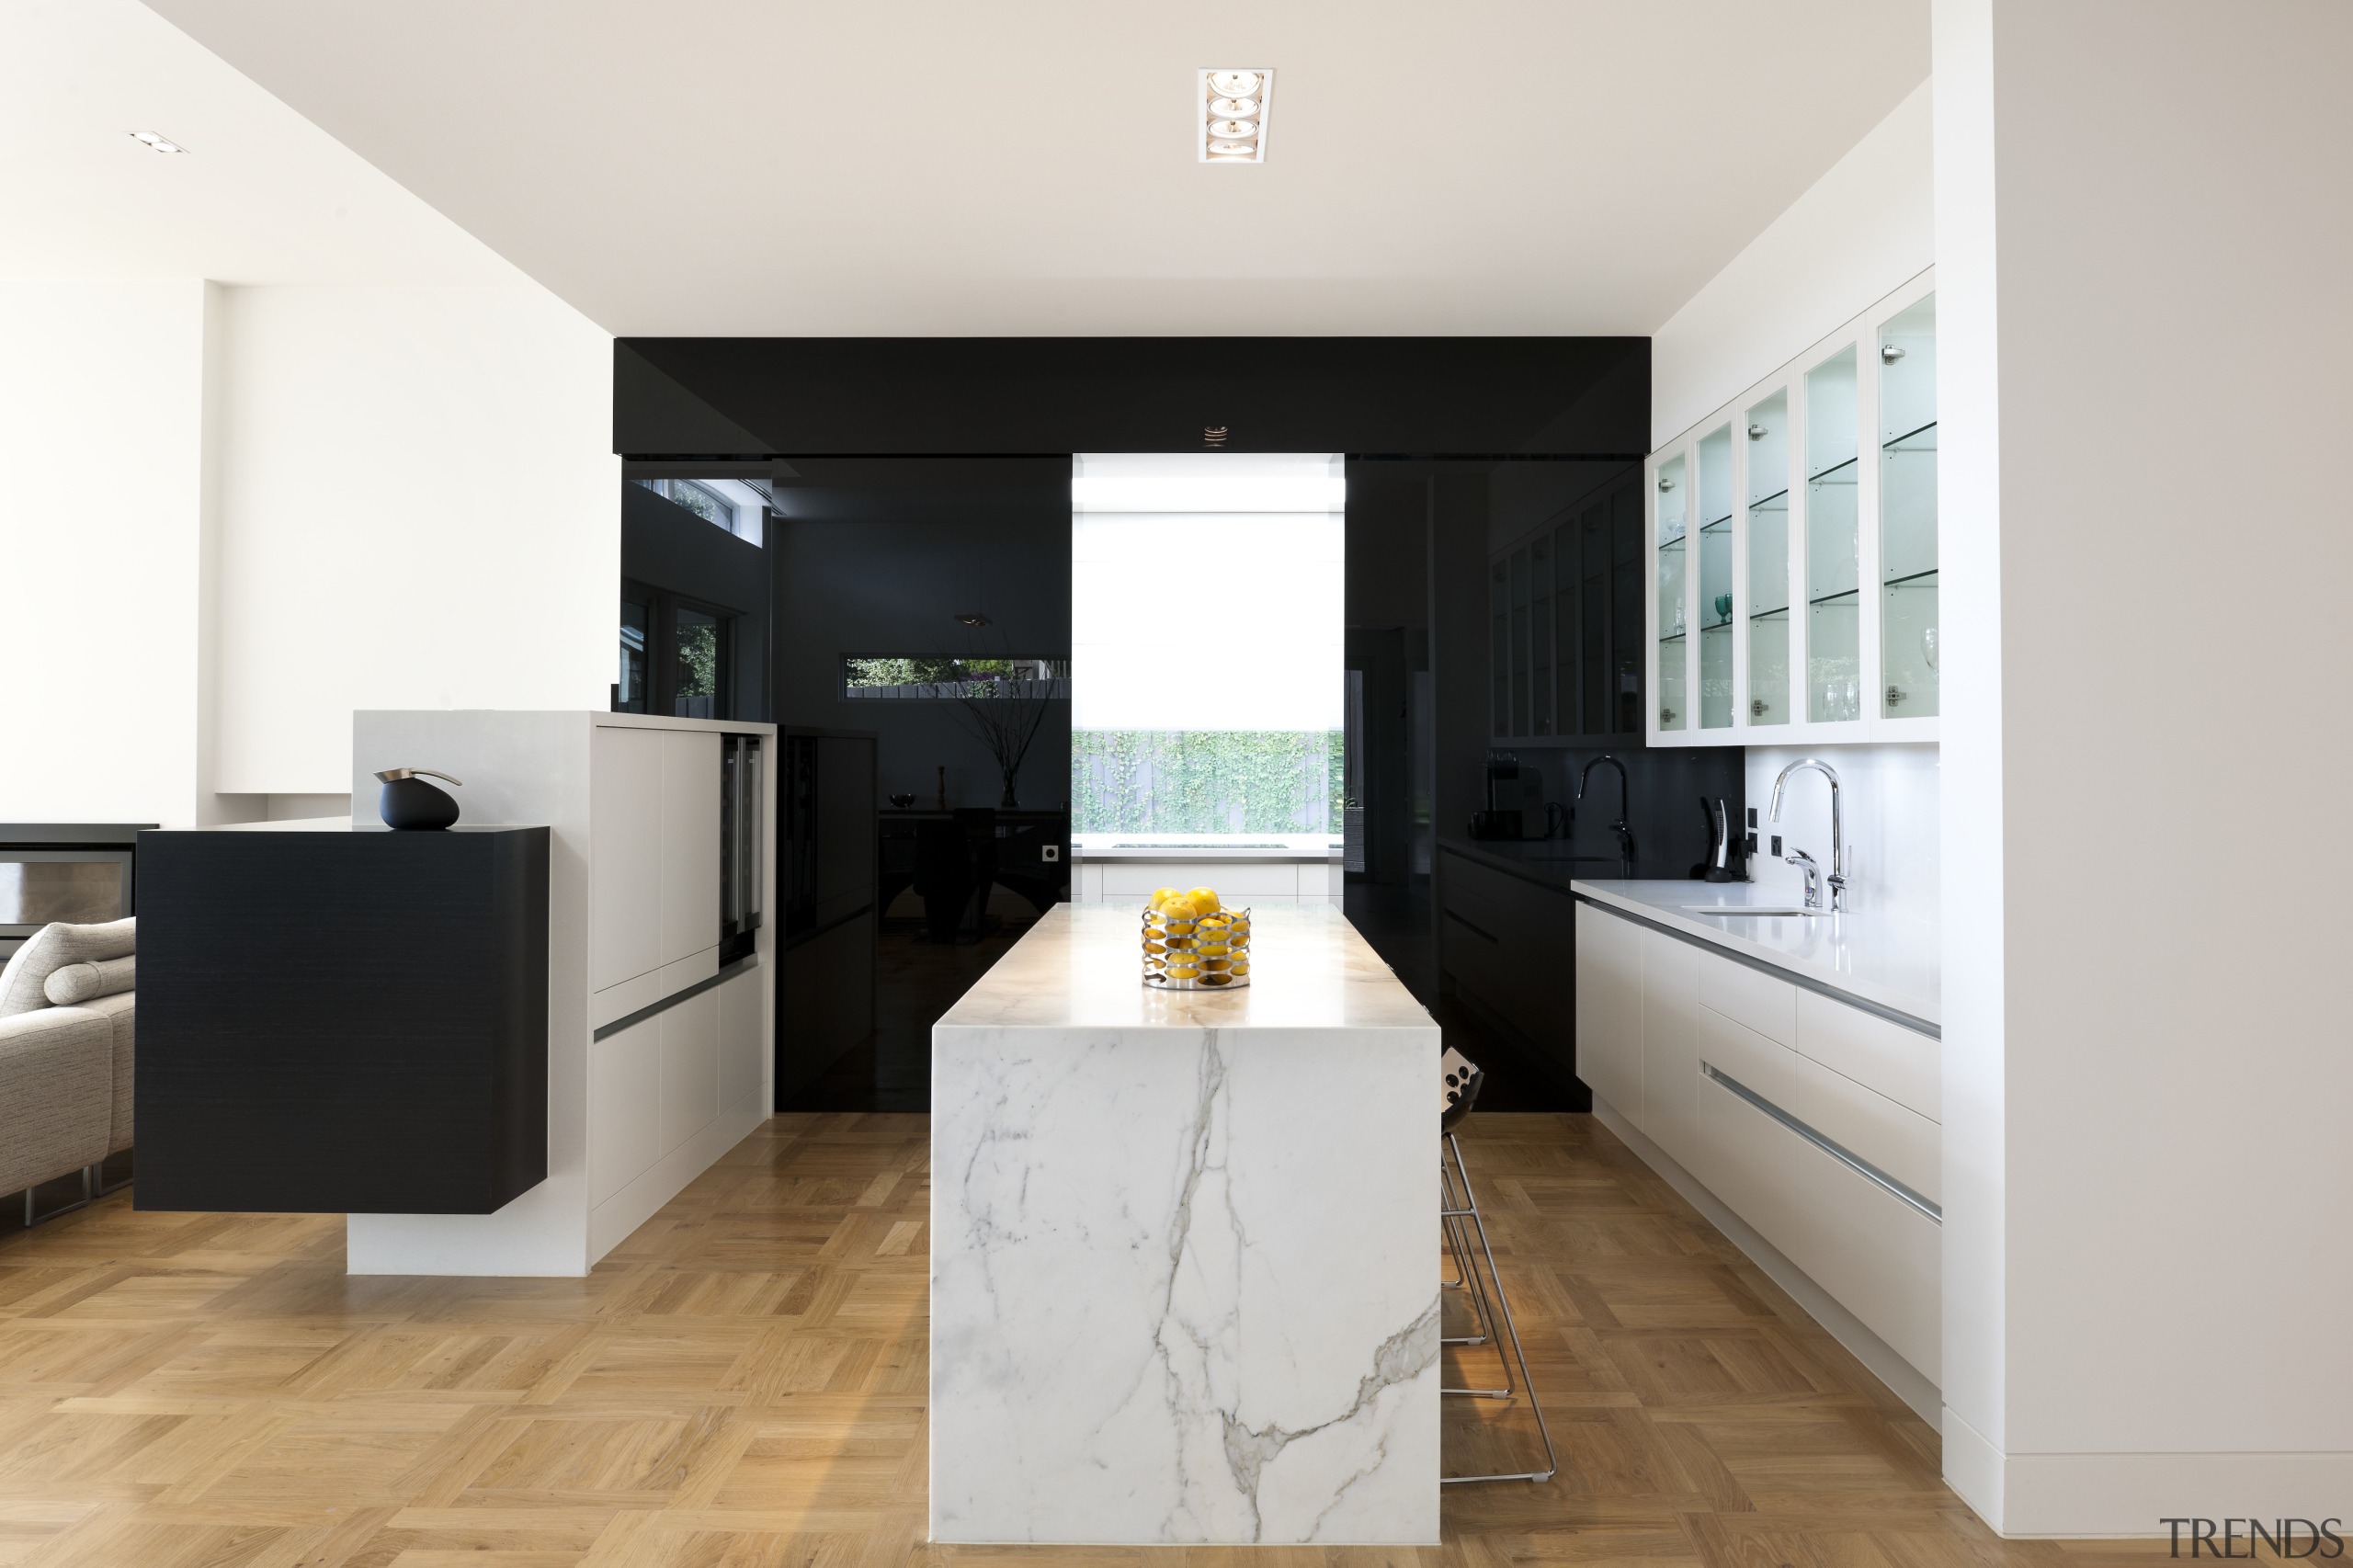 A black glass sliding door opens to a architecture, countertop, floor, flooring, interior design, kitchen, property, real estate, room, white